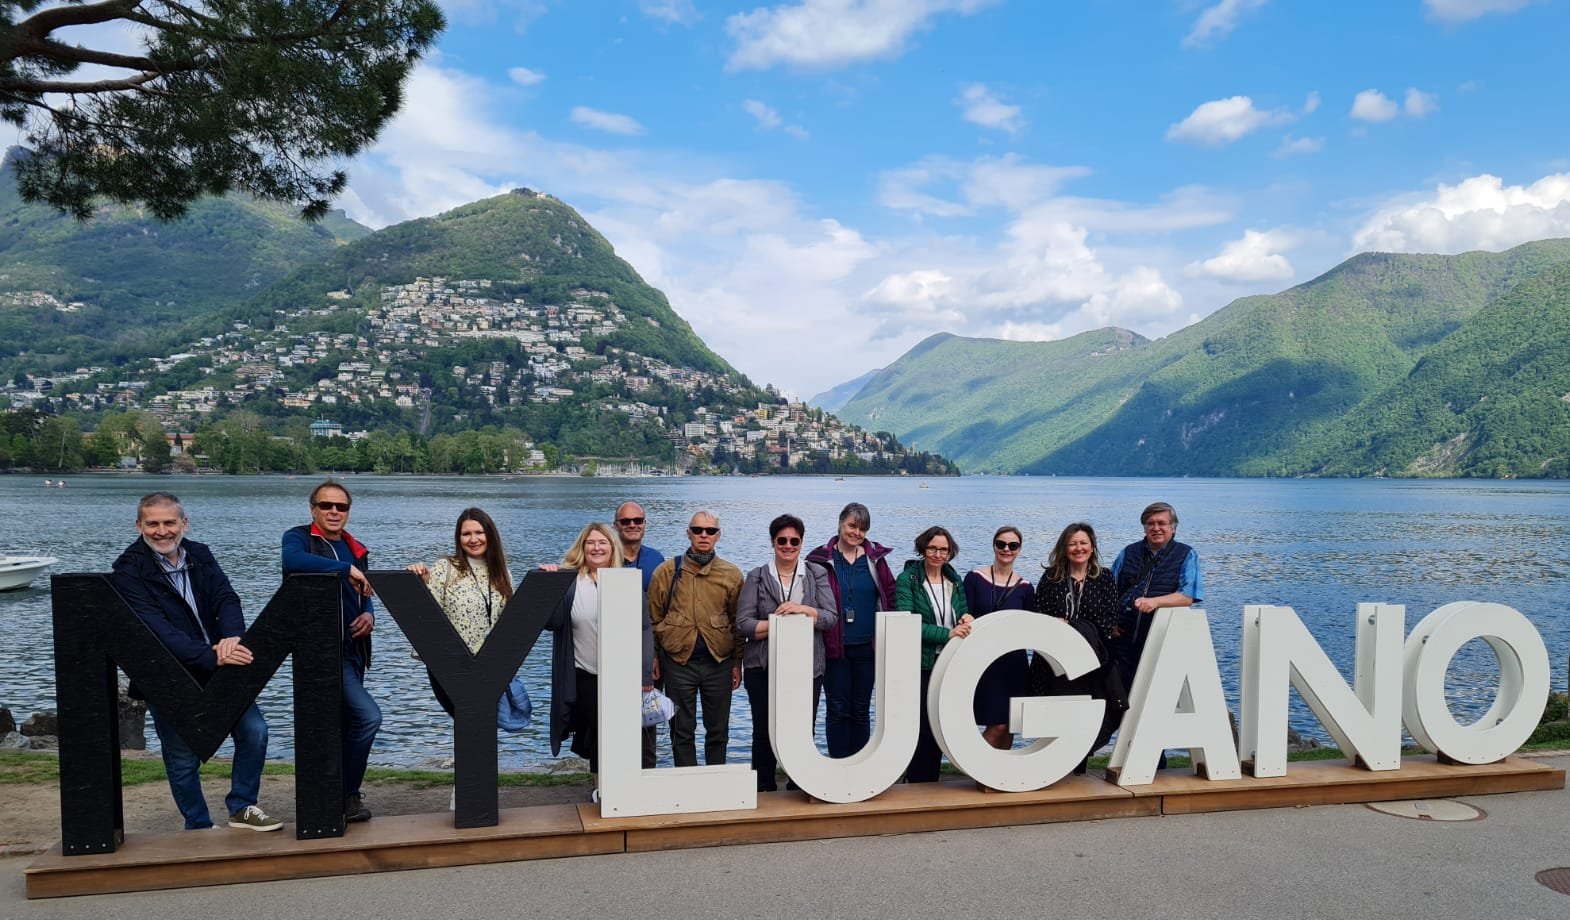 Group picture with the beautiful scenery of Lugano